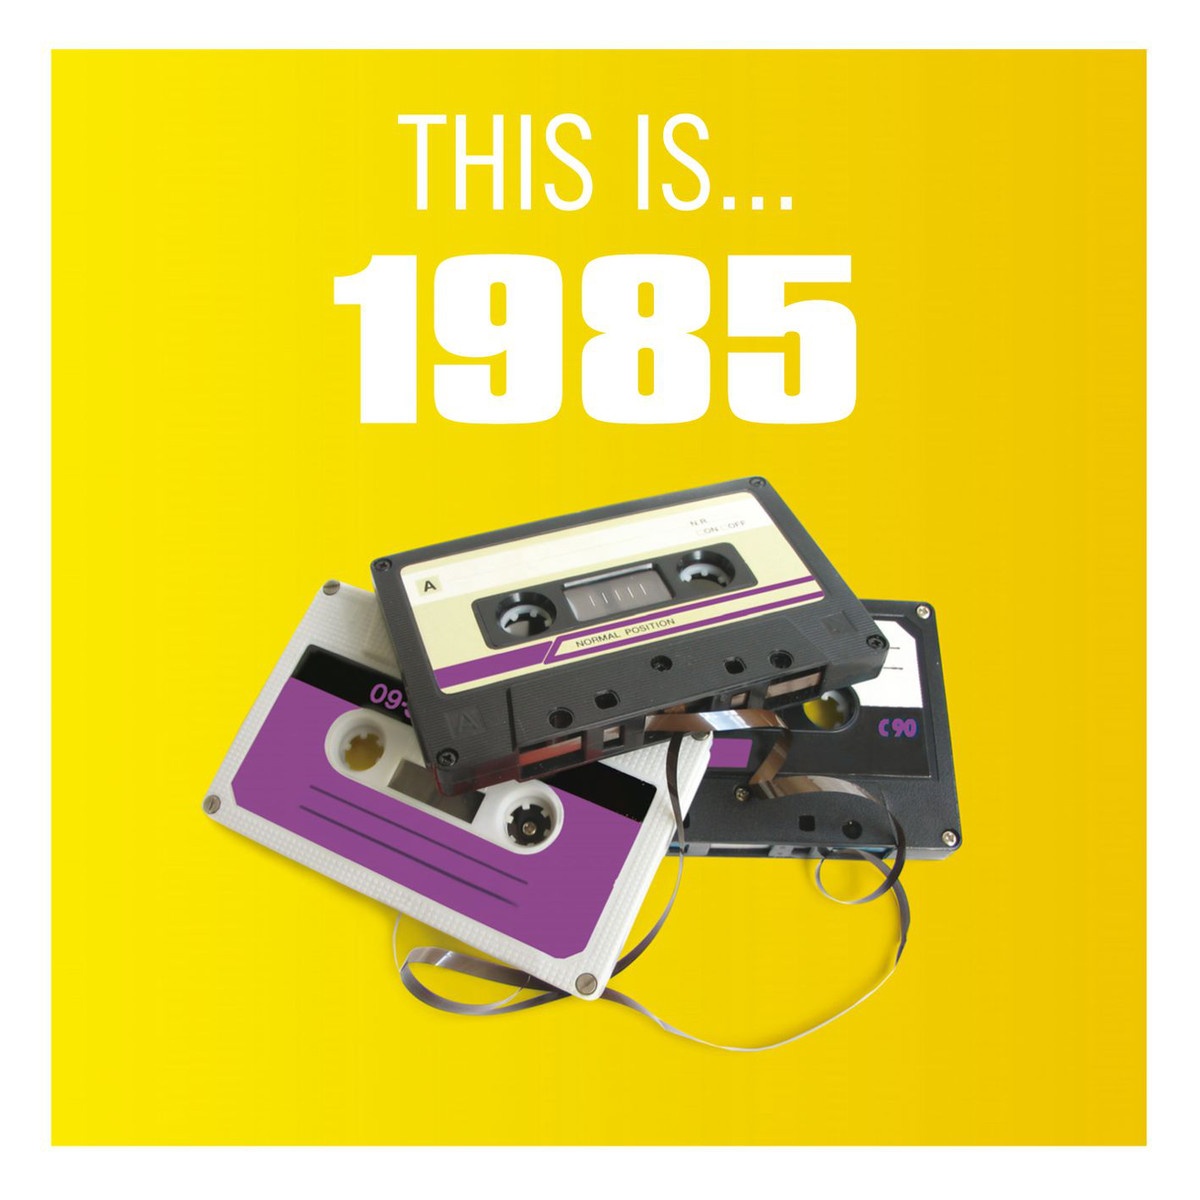 This Is... 1985